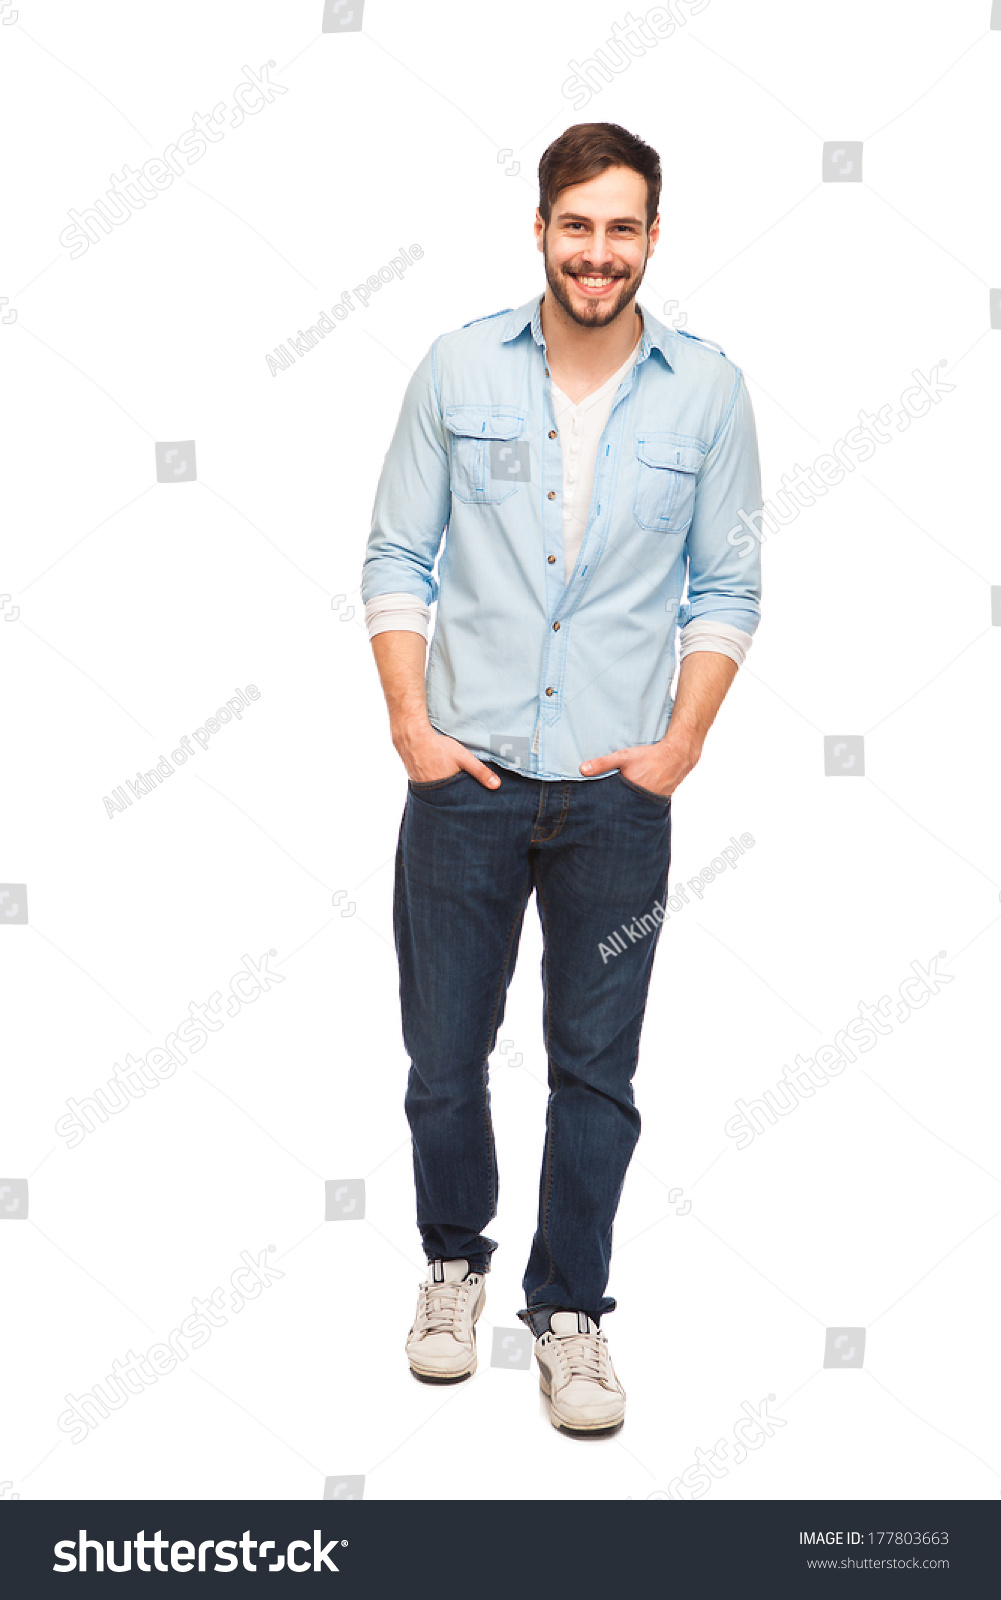 smiling young man with beard in a blue shirt on white background #177803663